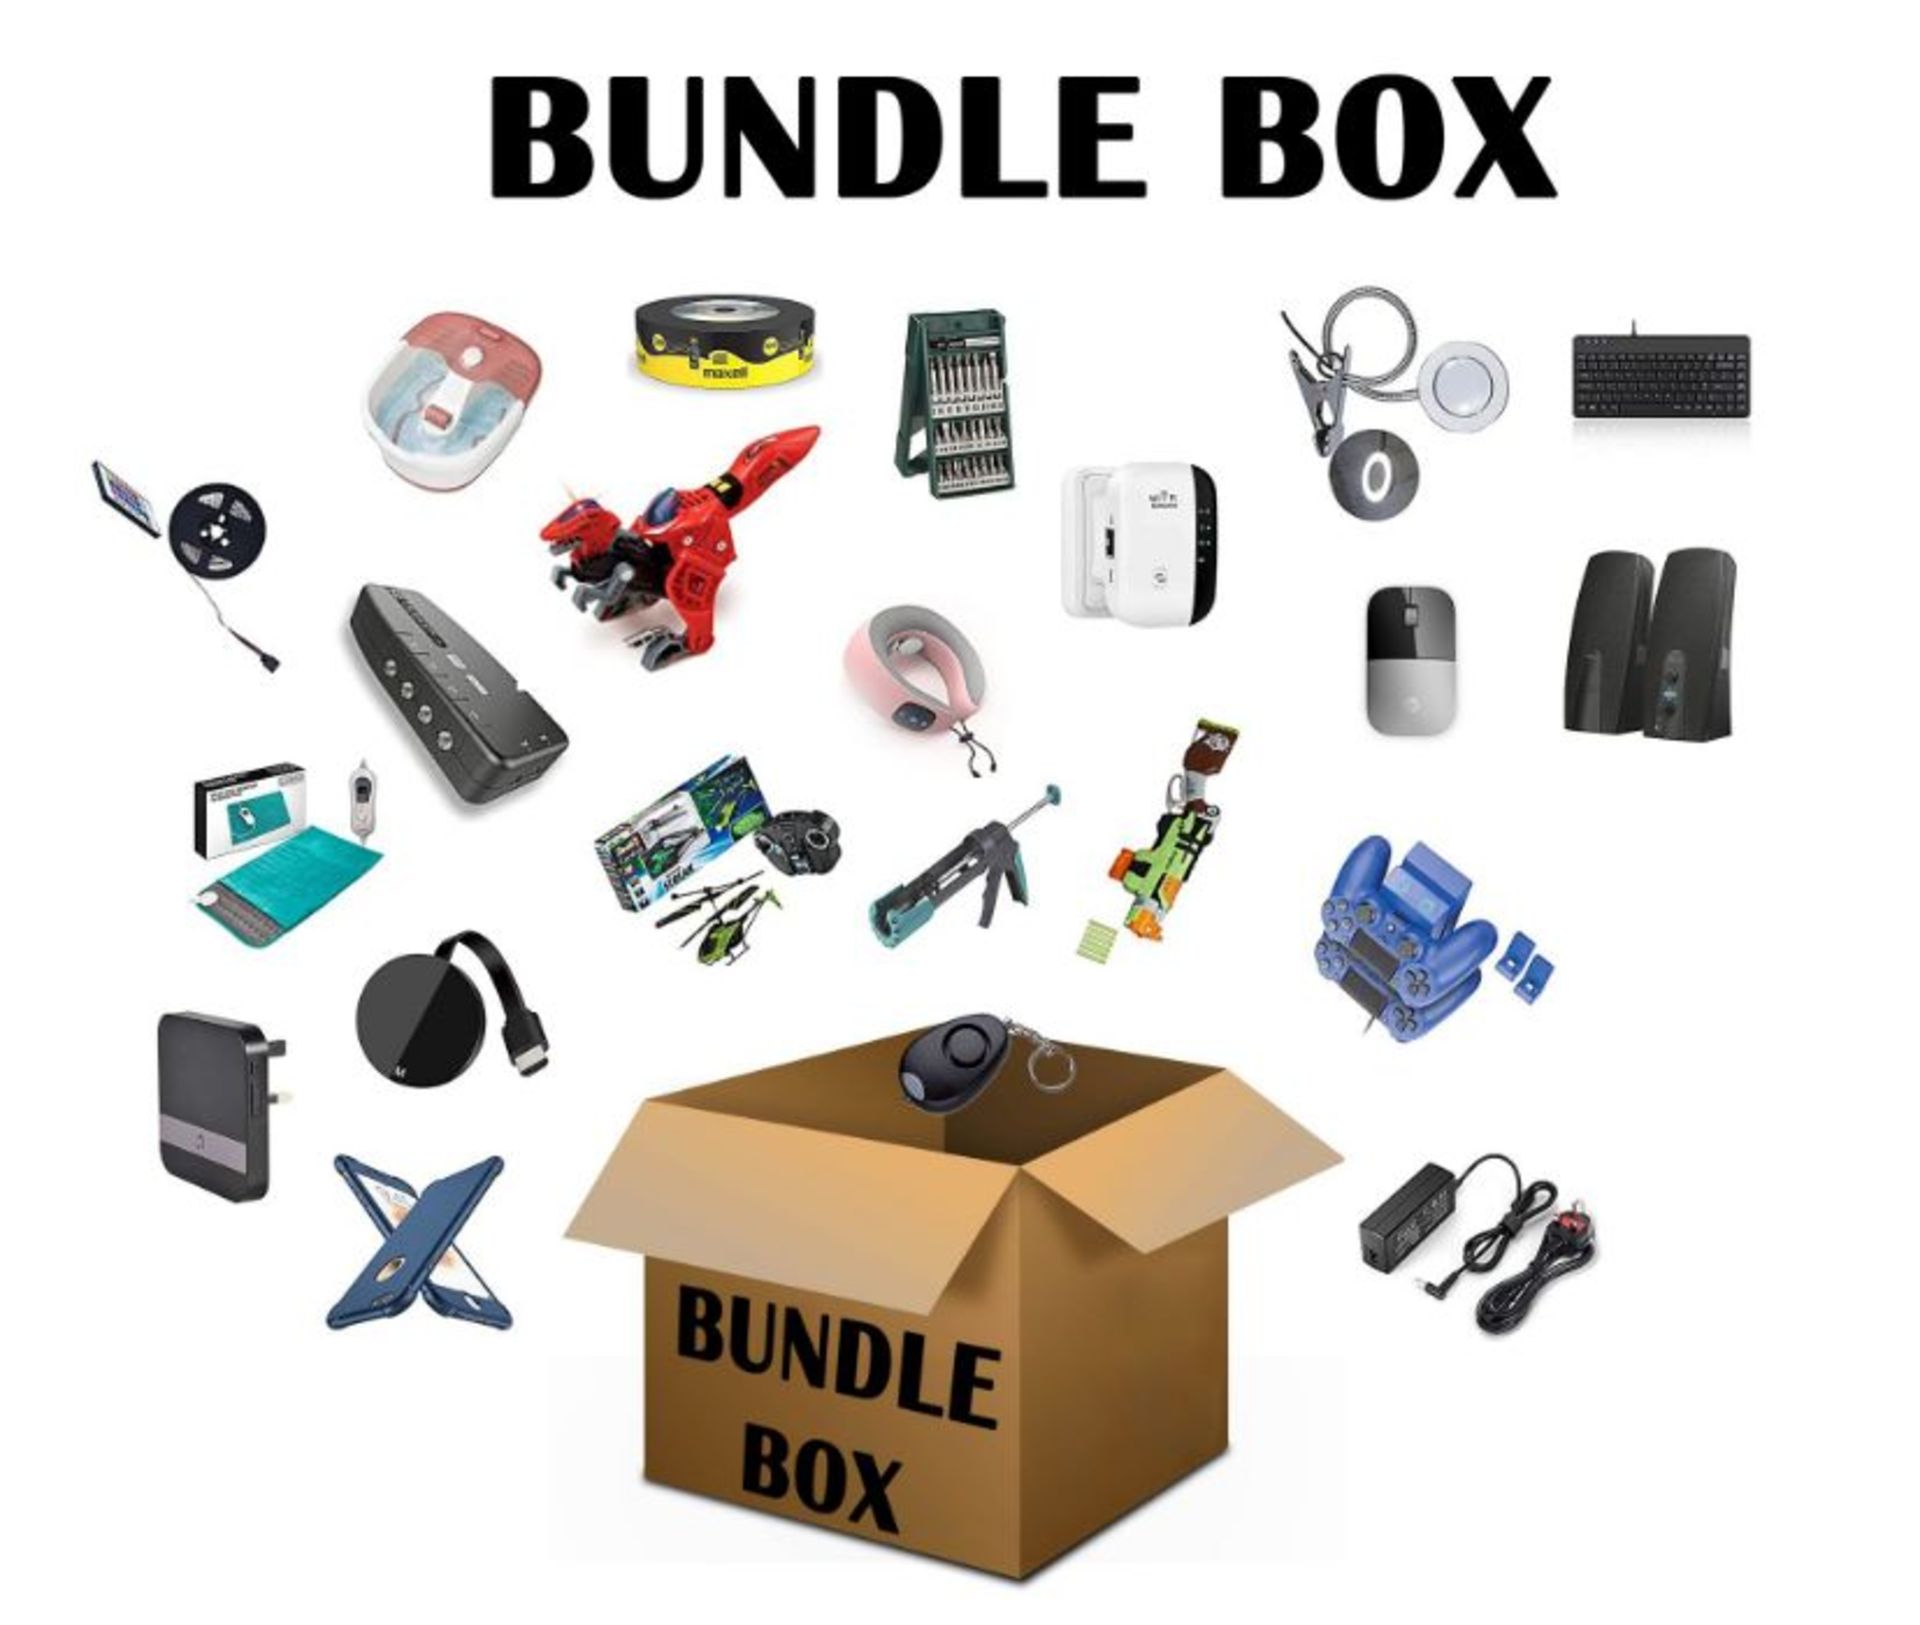 COMBINED RRP £3251.00 LOT TO CONTAIN 113 ASSORTED Tech Products: kwmobile, Ulykal, HAOYE, YLAB,